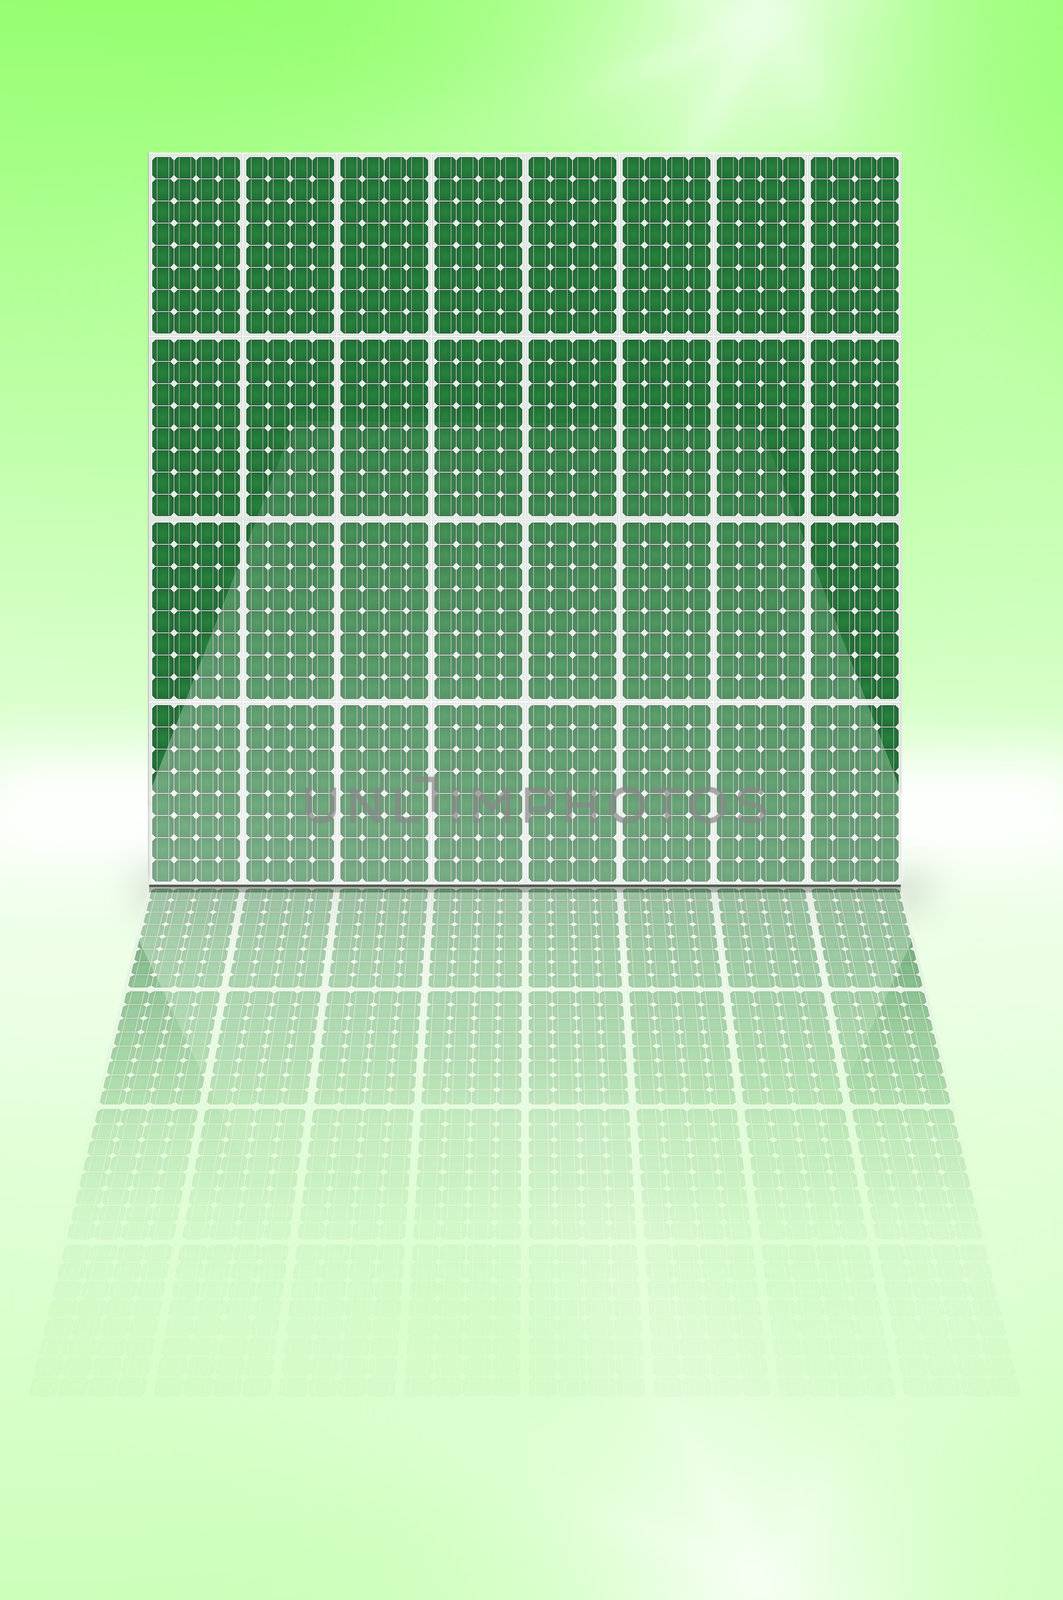 Illustration depicting a vertical array of green photovoltaic solar panels reflecting into a shiny foreground.